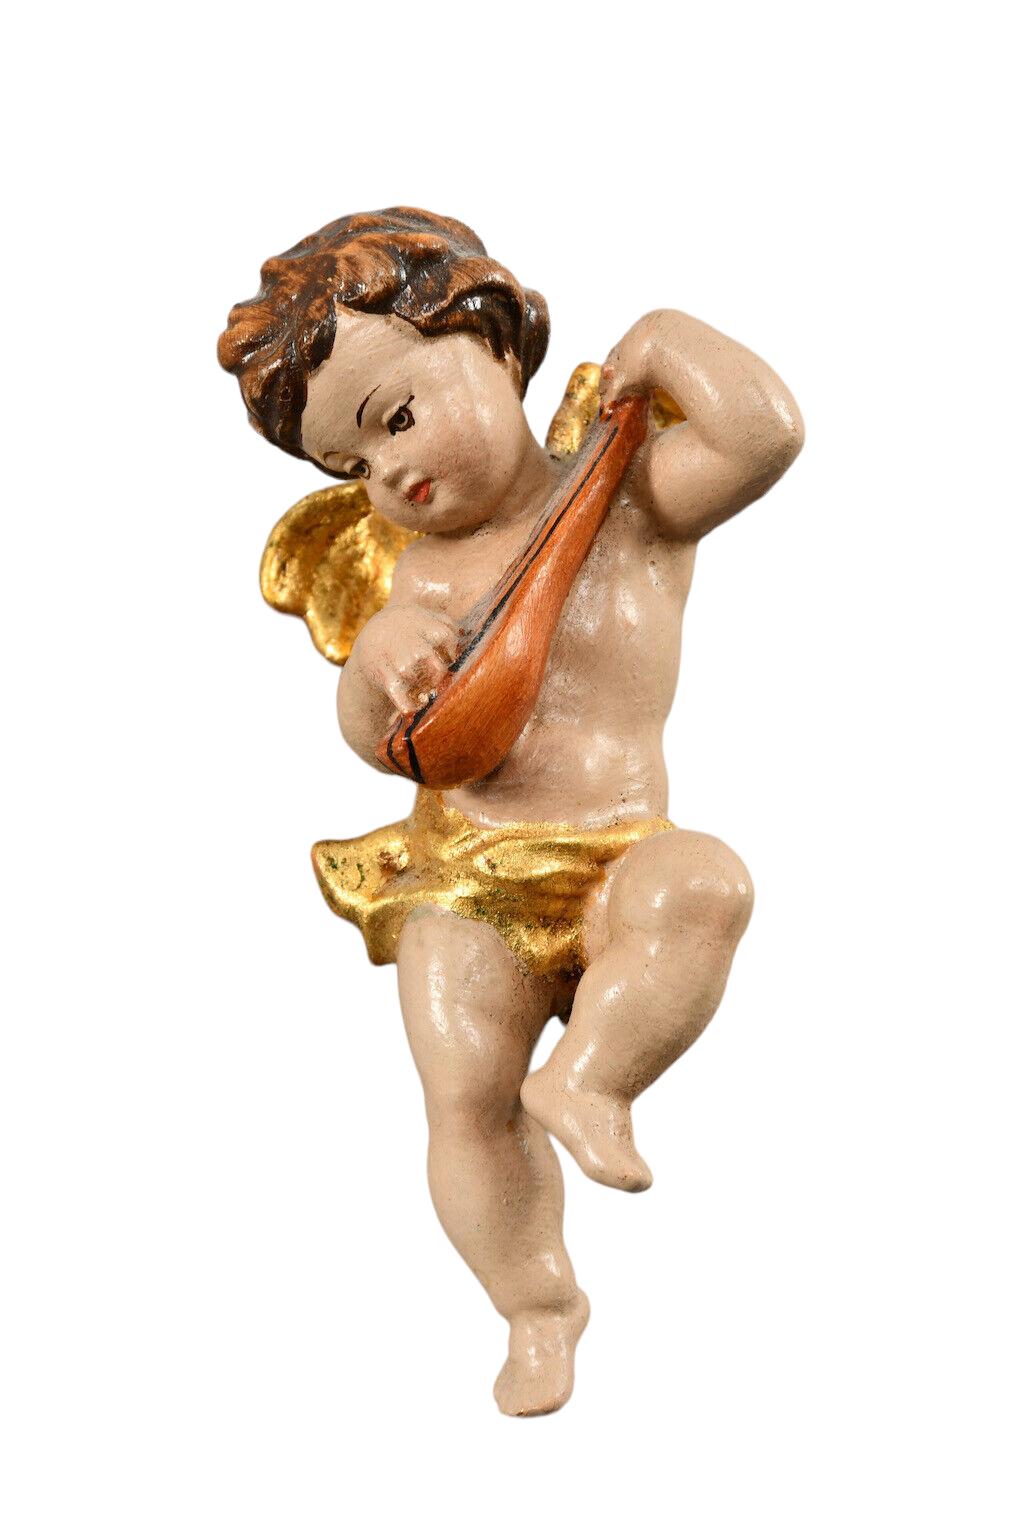 Three Petite Wood Carved Cherub Musician Angels, Vintage ANRI, Italy, 1980s For Sale 2